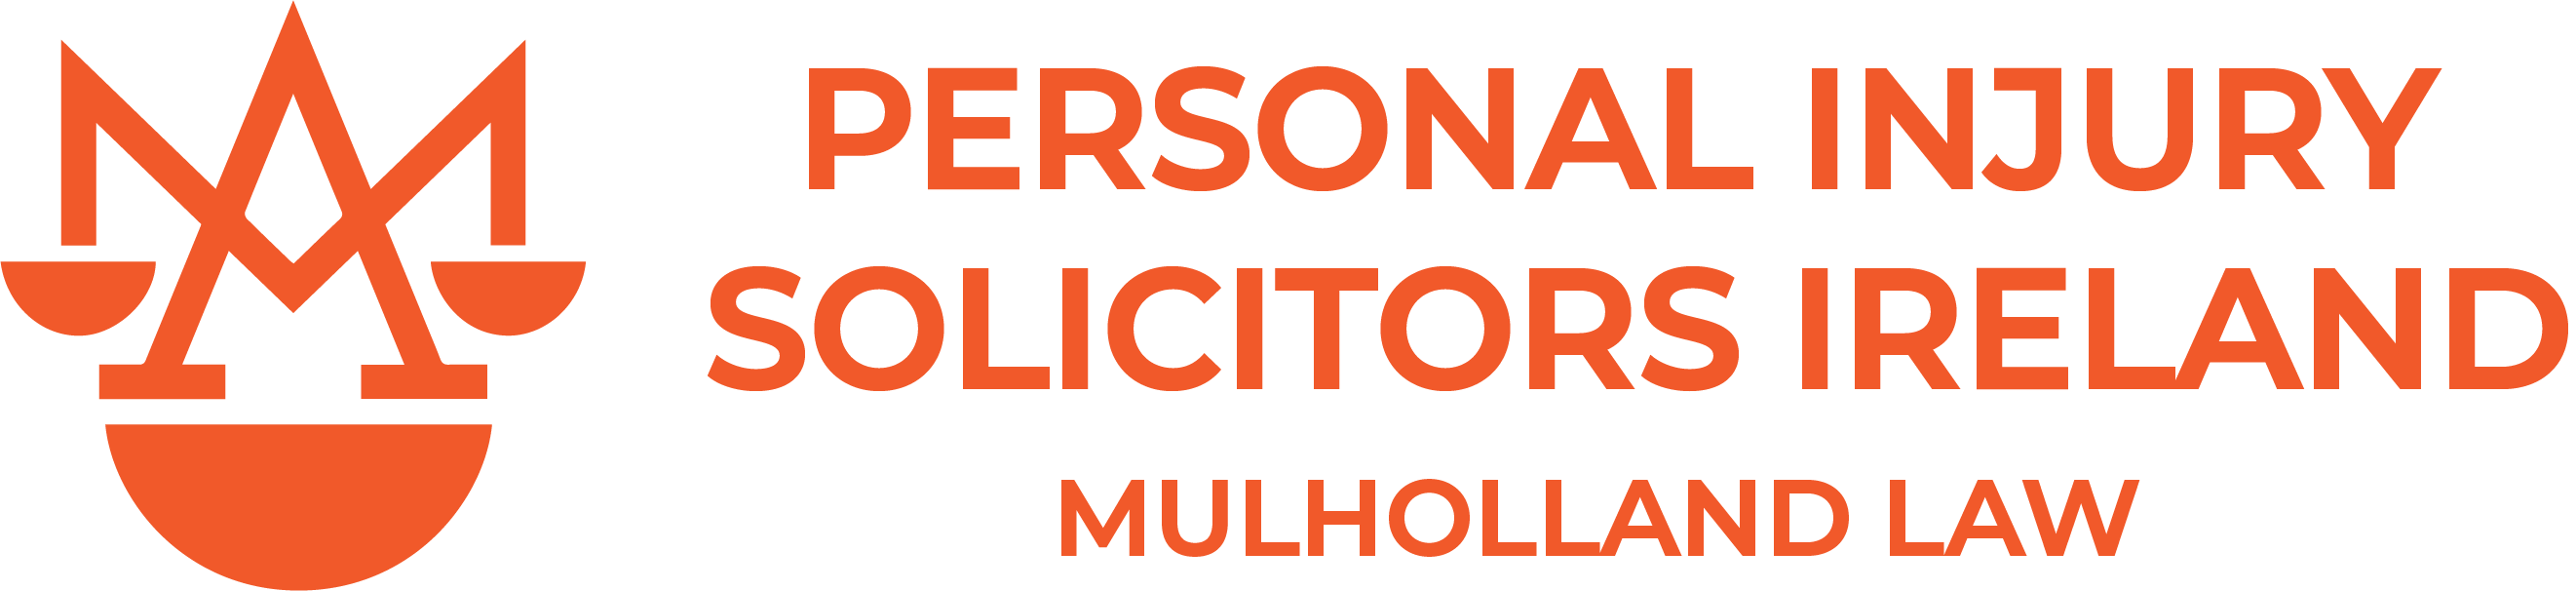 Personal Injury Solicitors Ireland